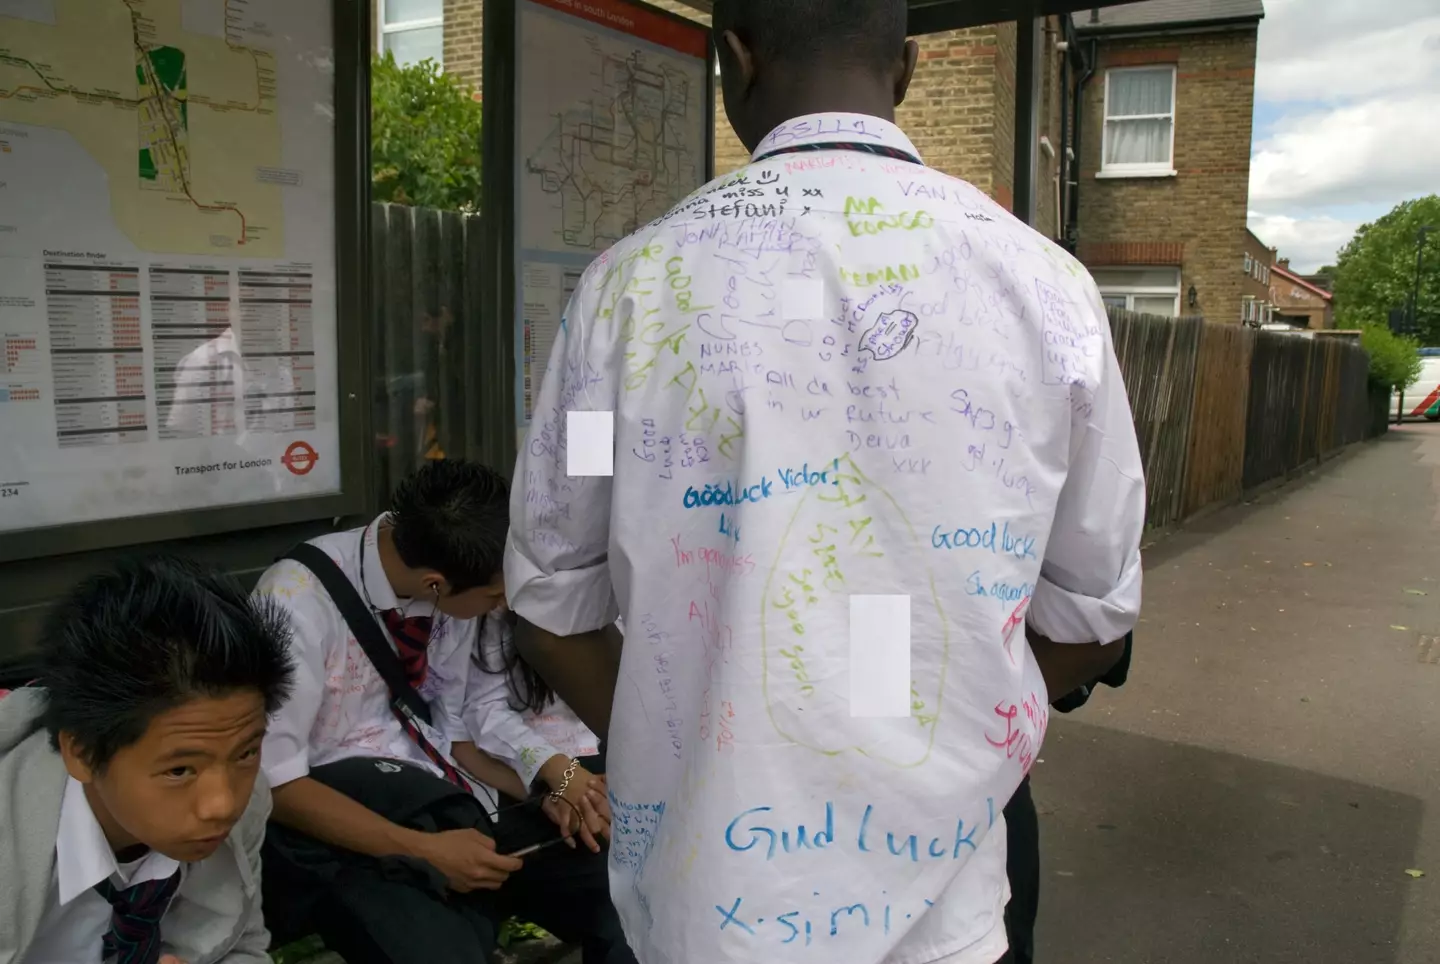 Over 50 pupils were sent home for writing on each other's shirts even though that's basically the whole point of school.